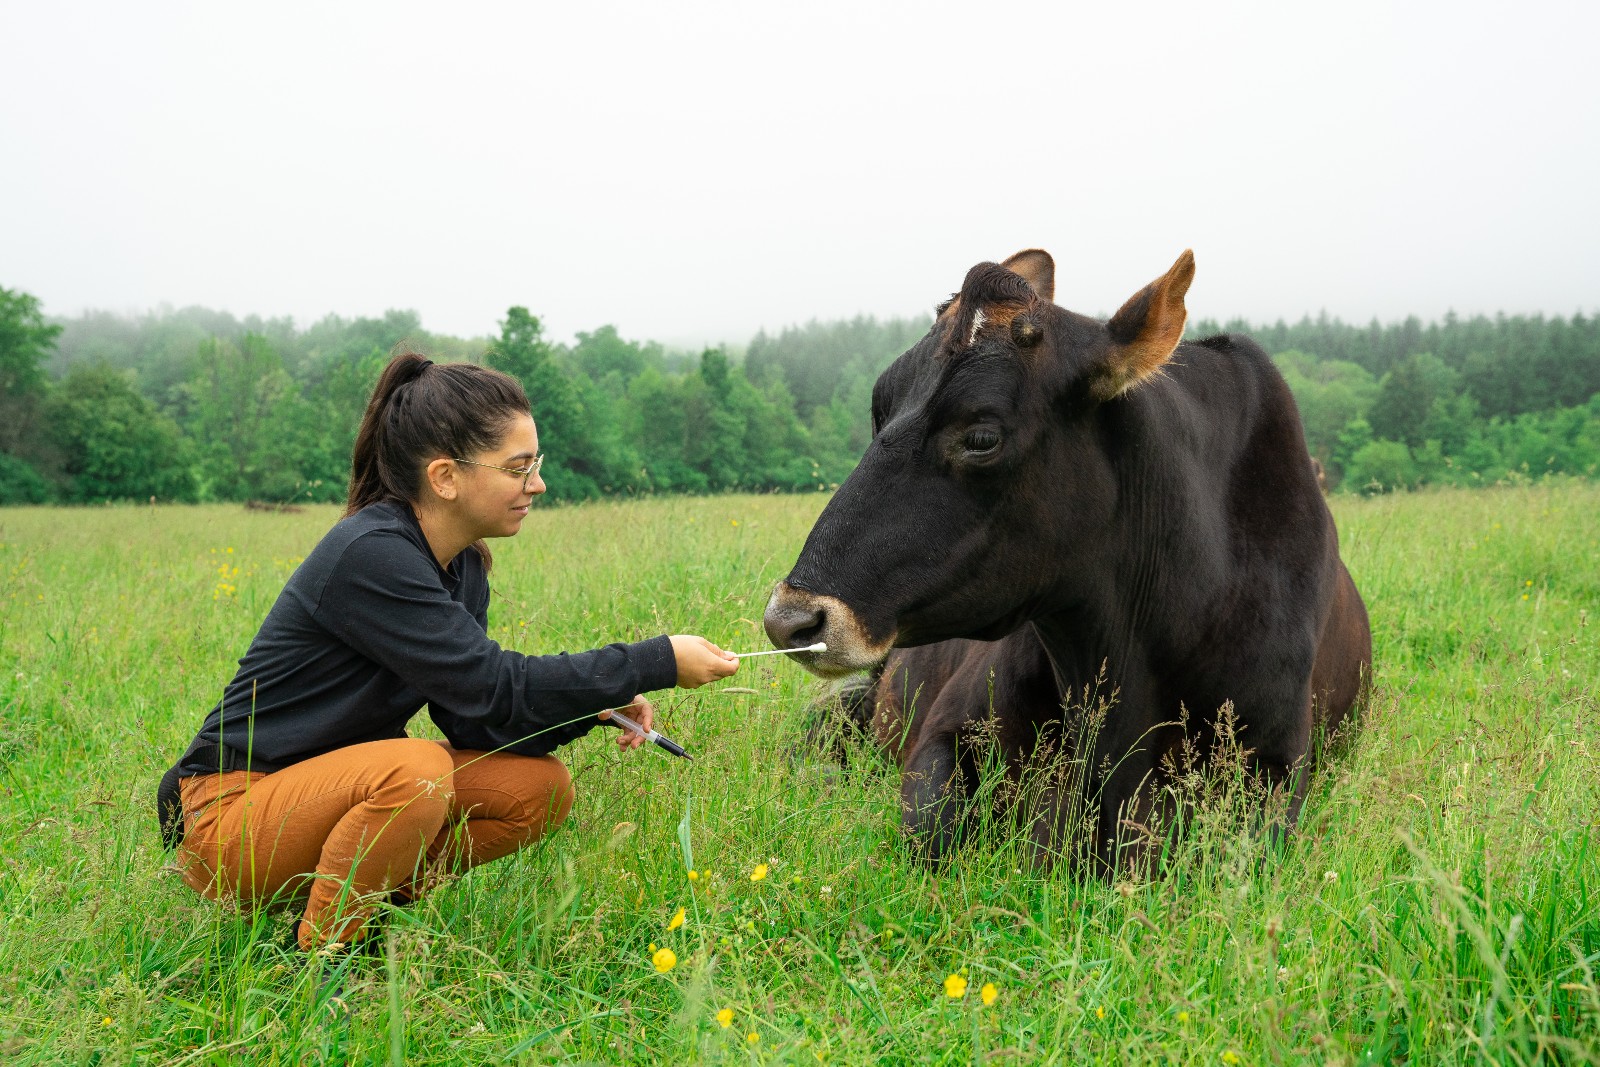 Farm Sanctuary researcher with cotton swap next to large brown cow in a large grass field